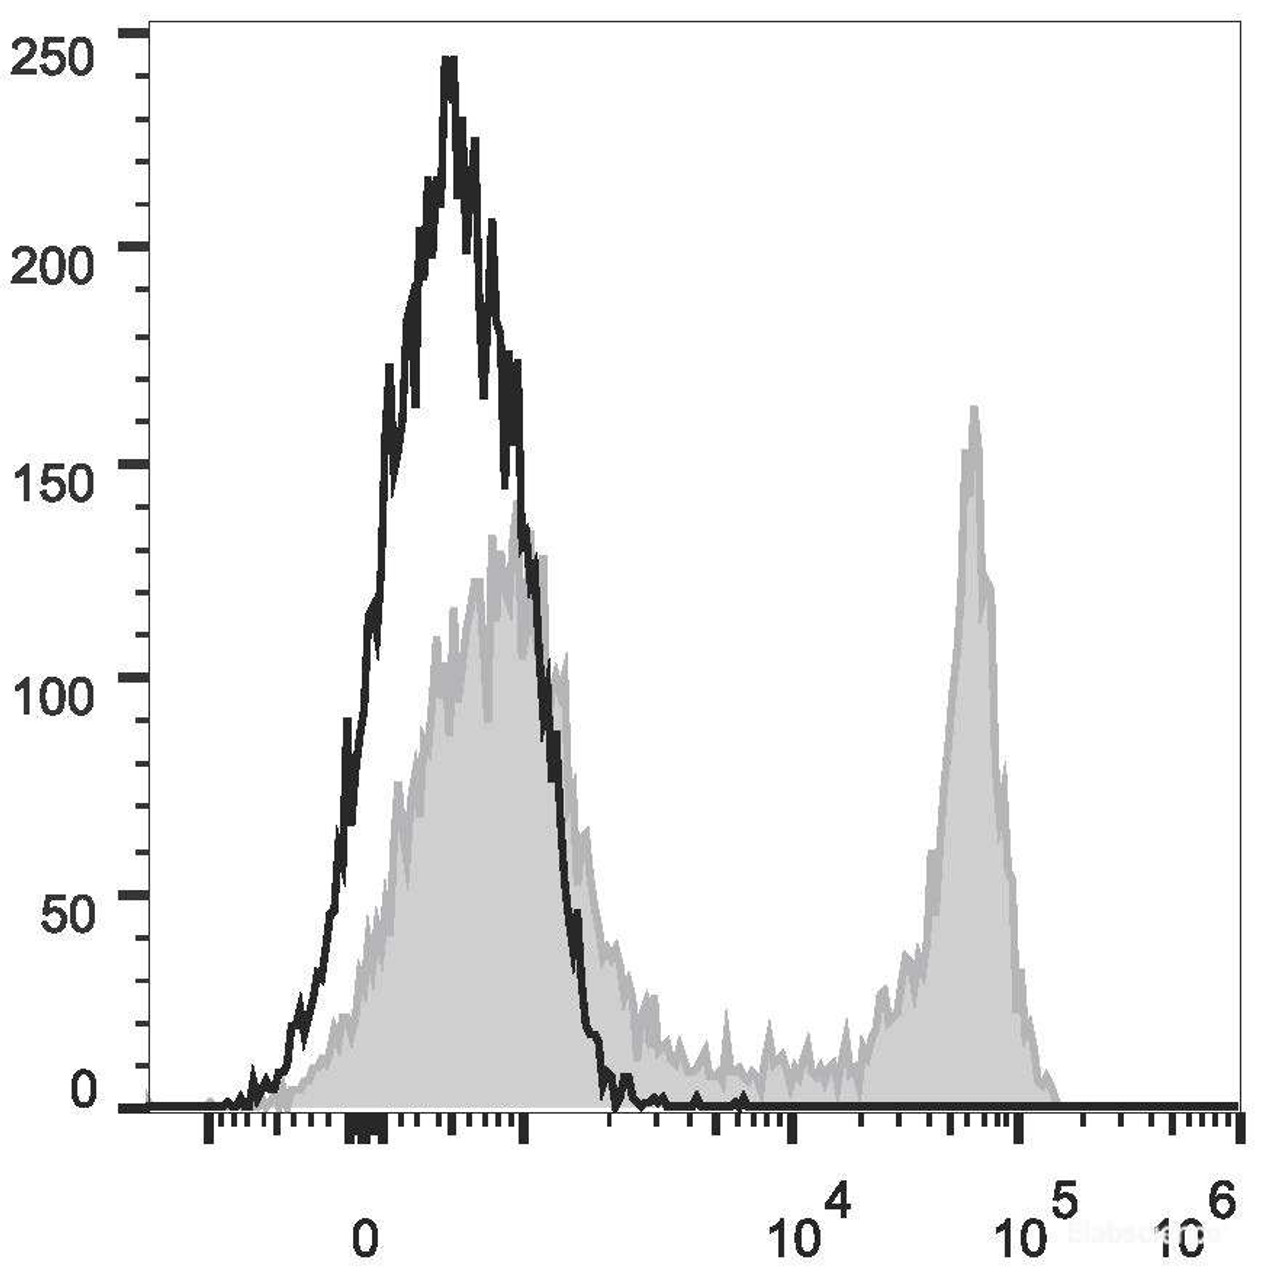 C57BL/6 murine splenocytes are stained with FITC Anti-Mouse CD45R/B22 Antibody[Used at .2 μg/1<sup>6</sup> cells dilution](filled gray histogram). Unstained splenocytes (empty black histogram) are used as control.